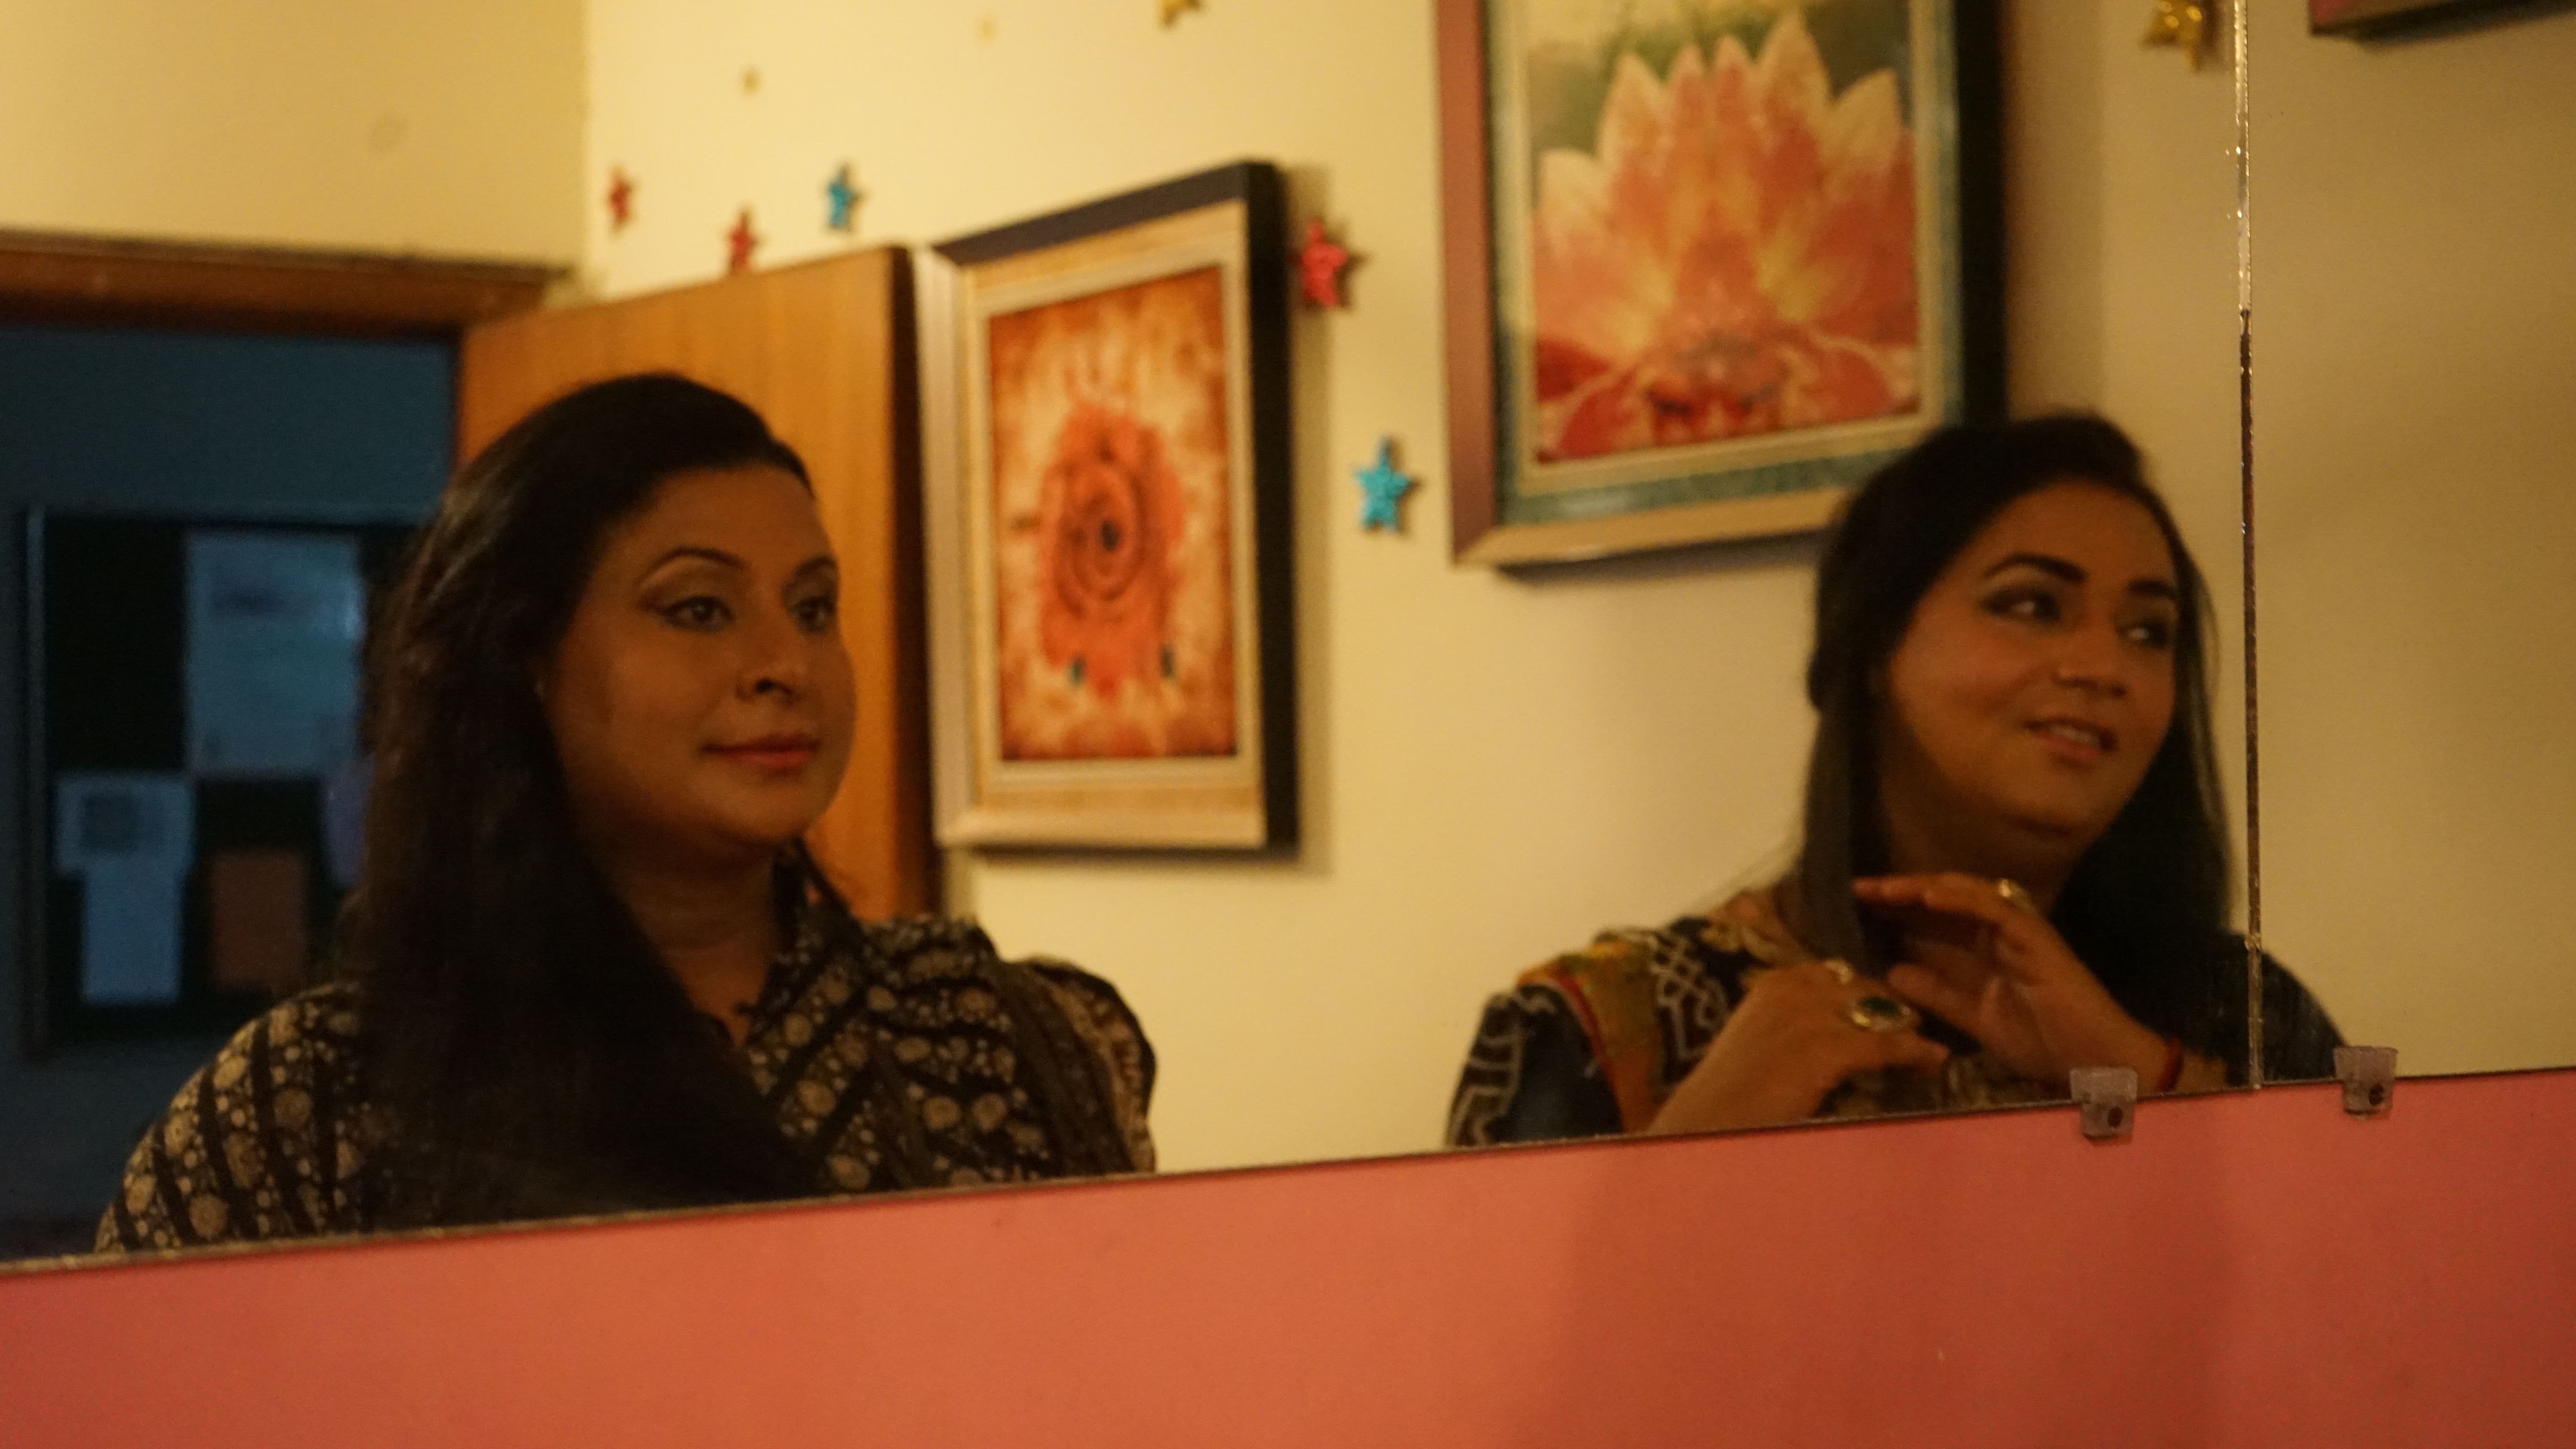 Neeli and Zehrish glance in the mirror after returning from a television appearance